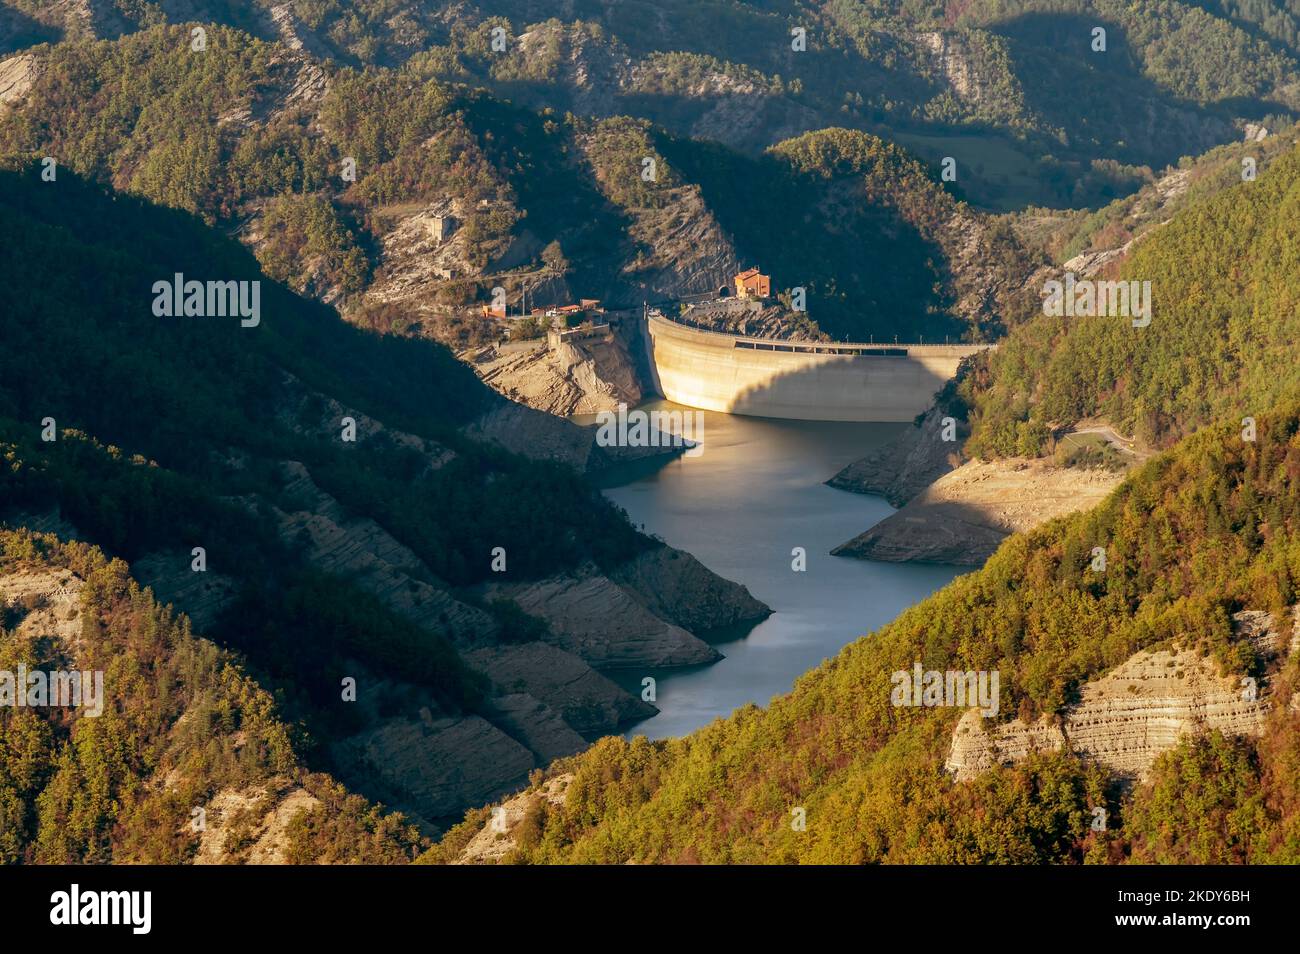 Aerial view of the Ridracoli lake and dam, Bagno di Romagna, Italy Stock Photo